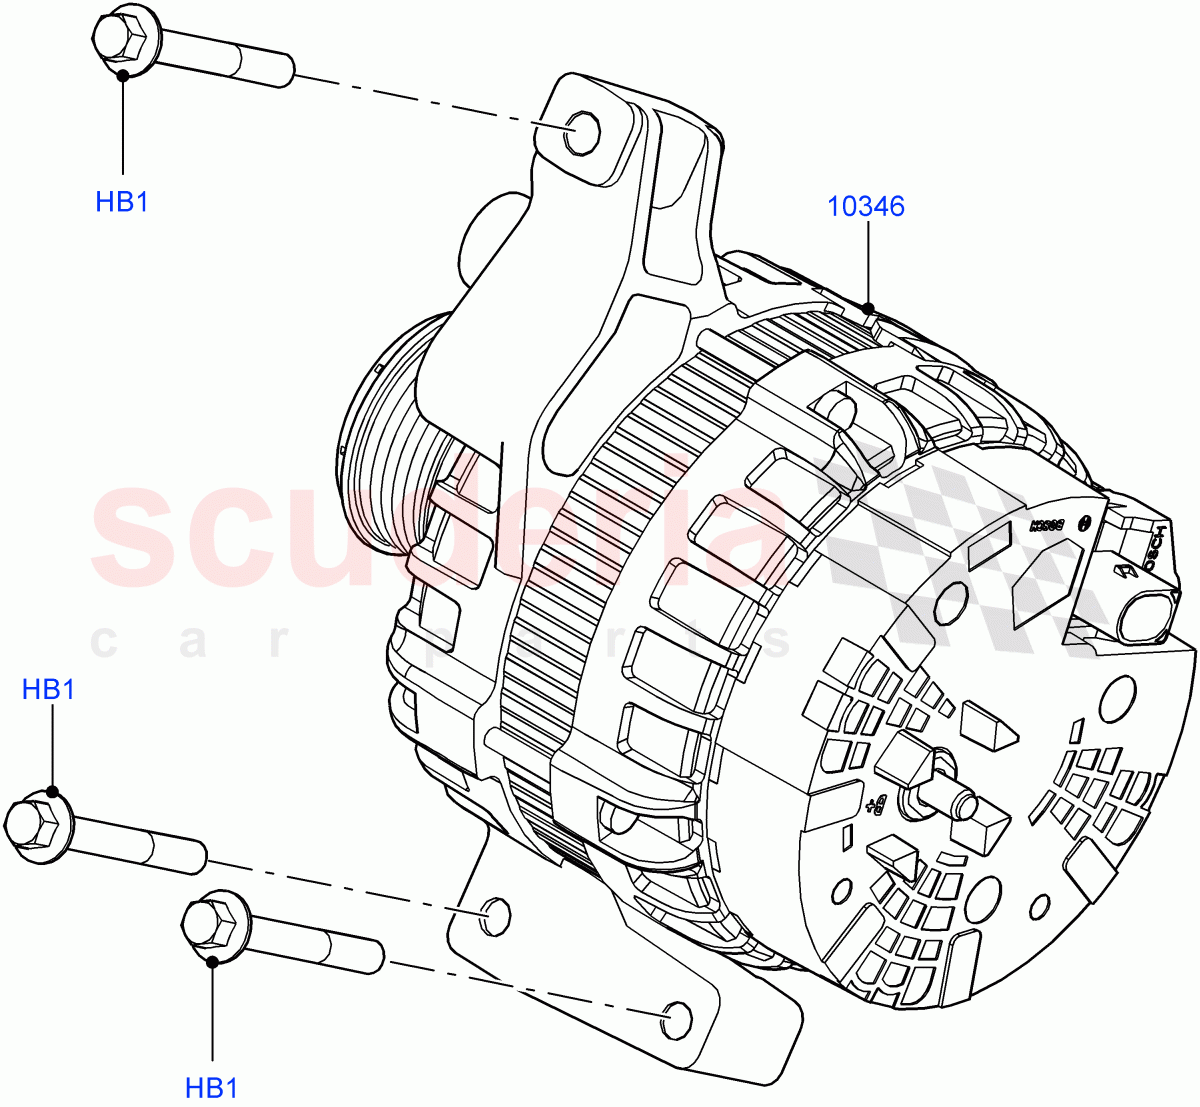 Alternator And Mountings(2.0L 16V TIVCT T/C 240PS Petrol,Itatiaia (Brazil))((V)FROMGT000001) of Land Rover Land Rover Discovery Sport (2015+) [2.0 Turbo Petrol GTDI]